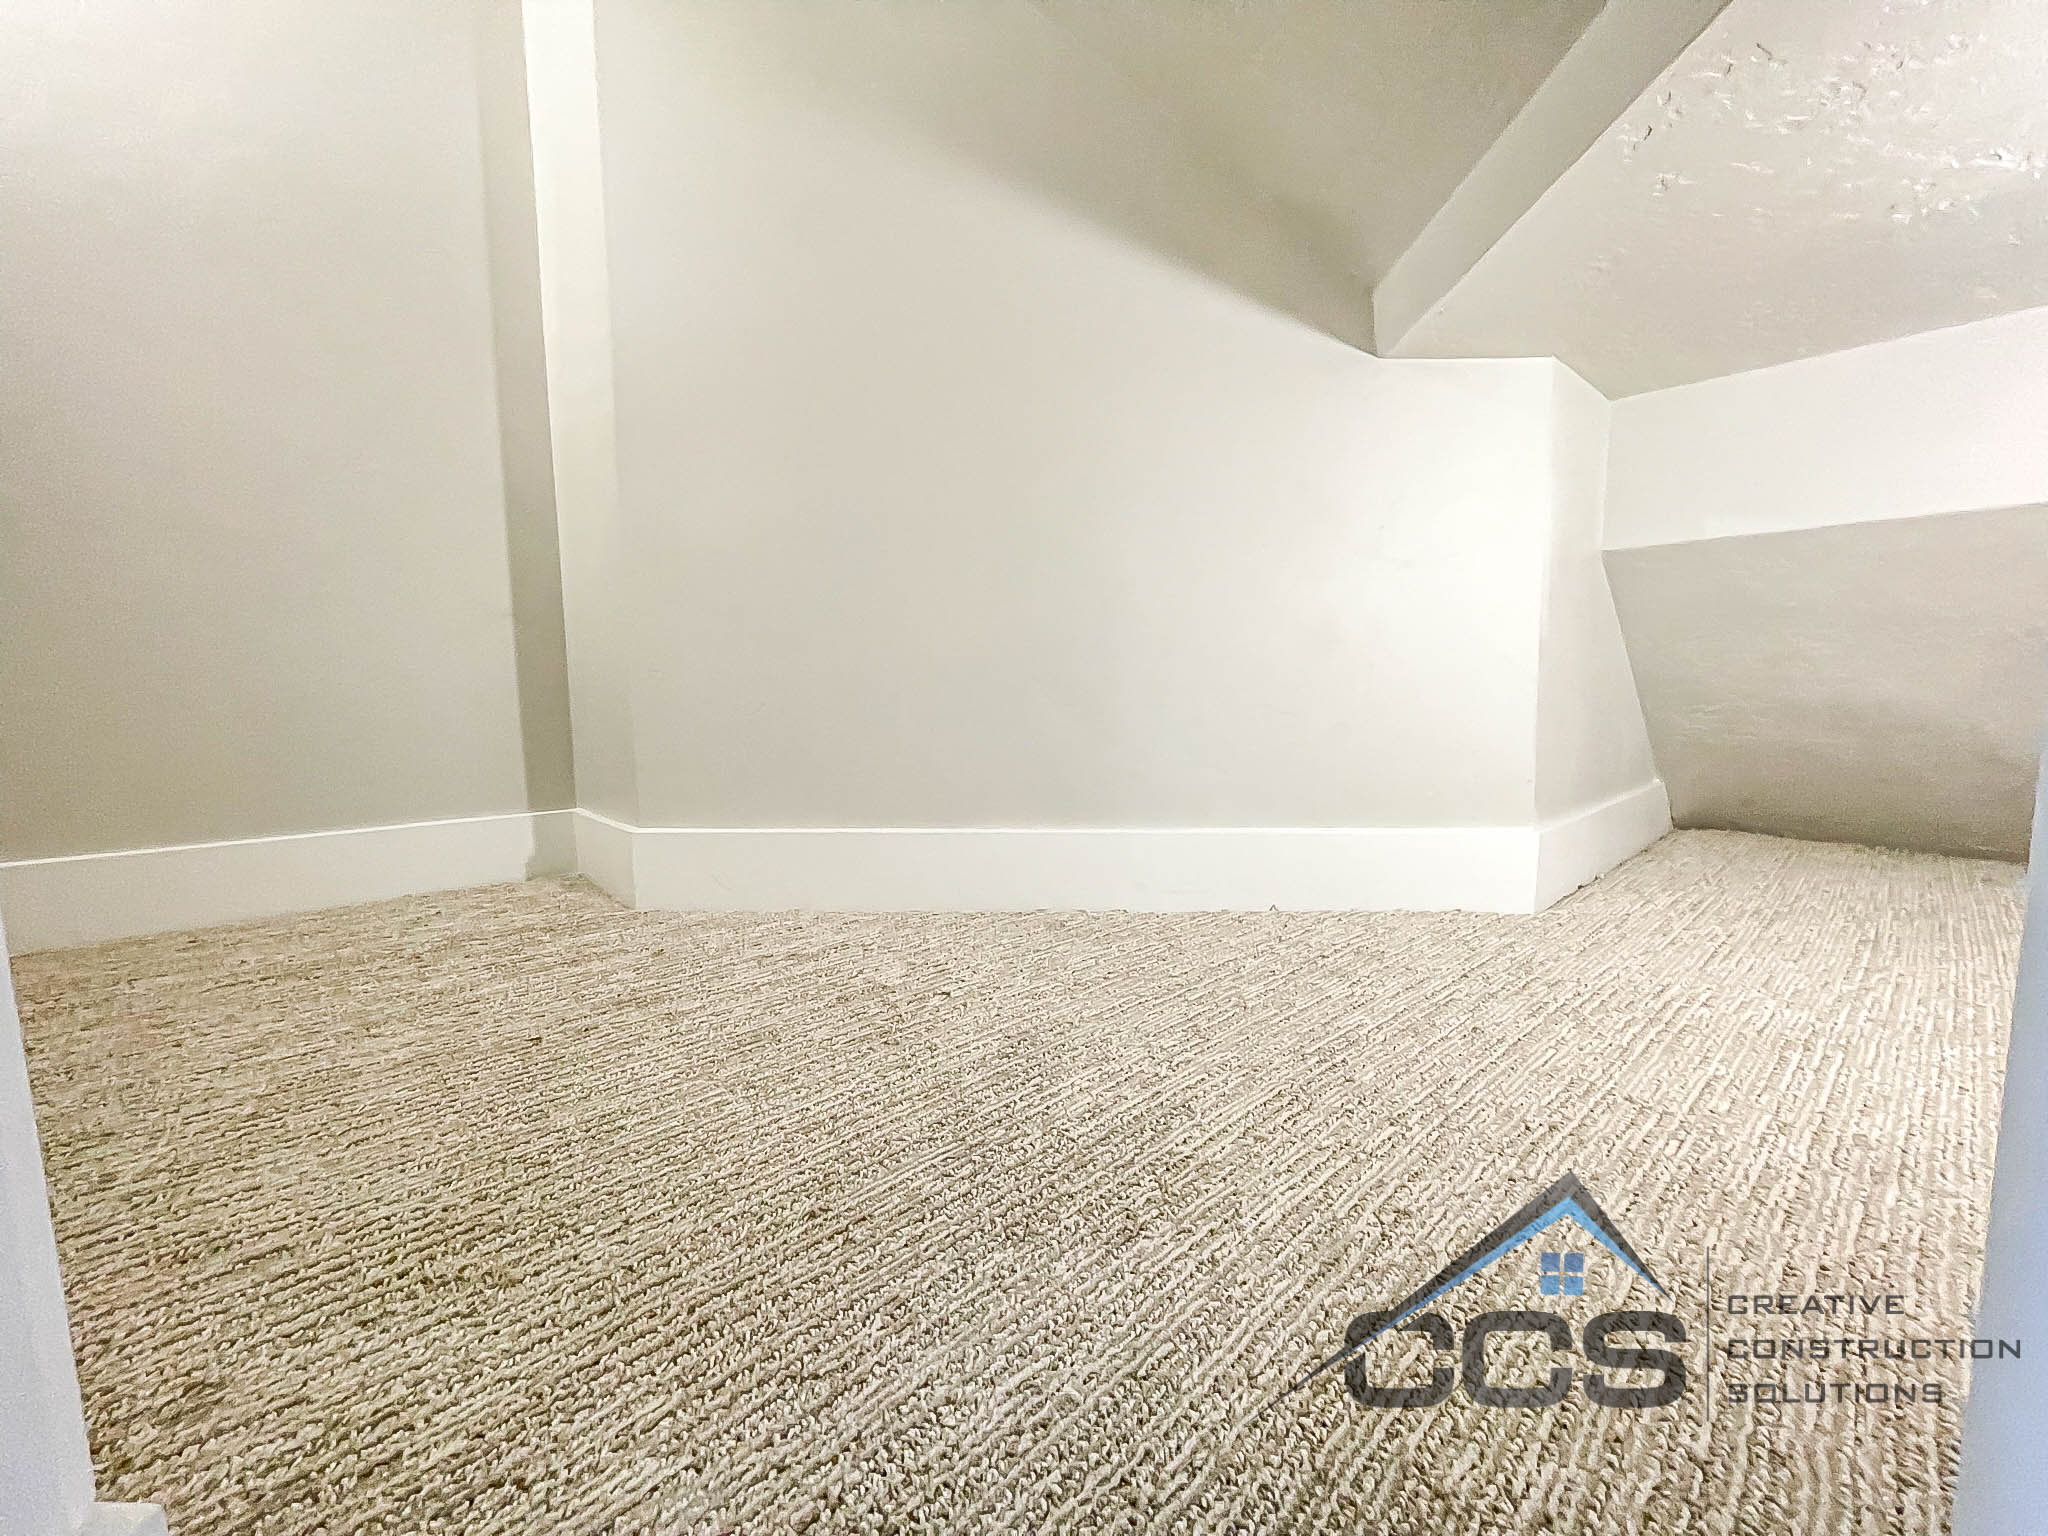 An image of a finished basement in Suncrest, Utah. A logo for CCS, Creative Construction Solutions in is the right hand corner.